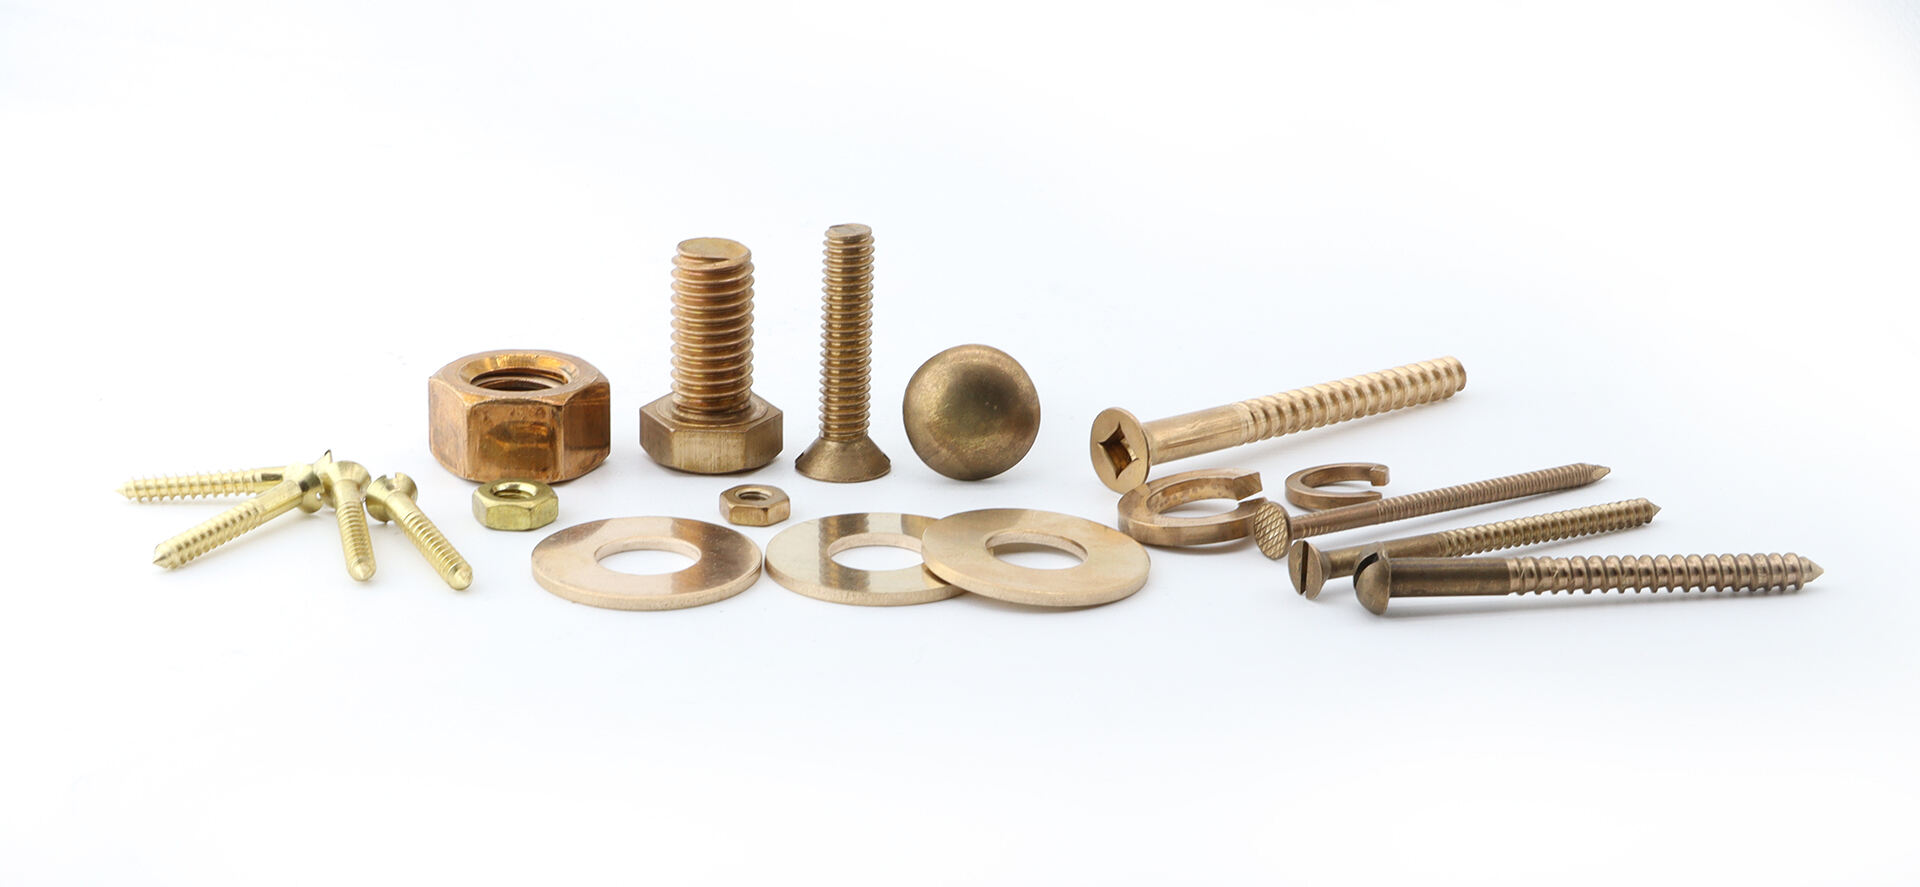  Silicon Bronze hex bolt and Silicon Bronze hexagonl nut kit manufacture